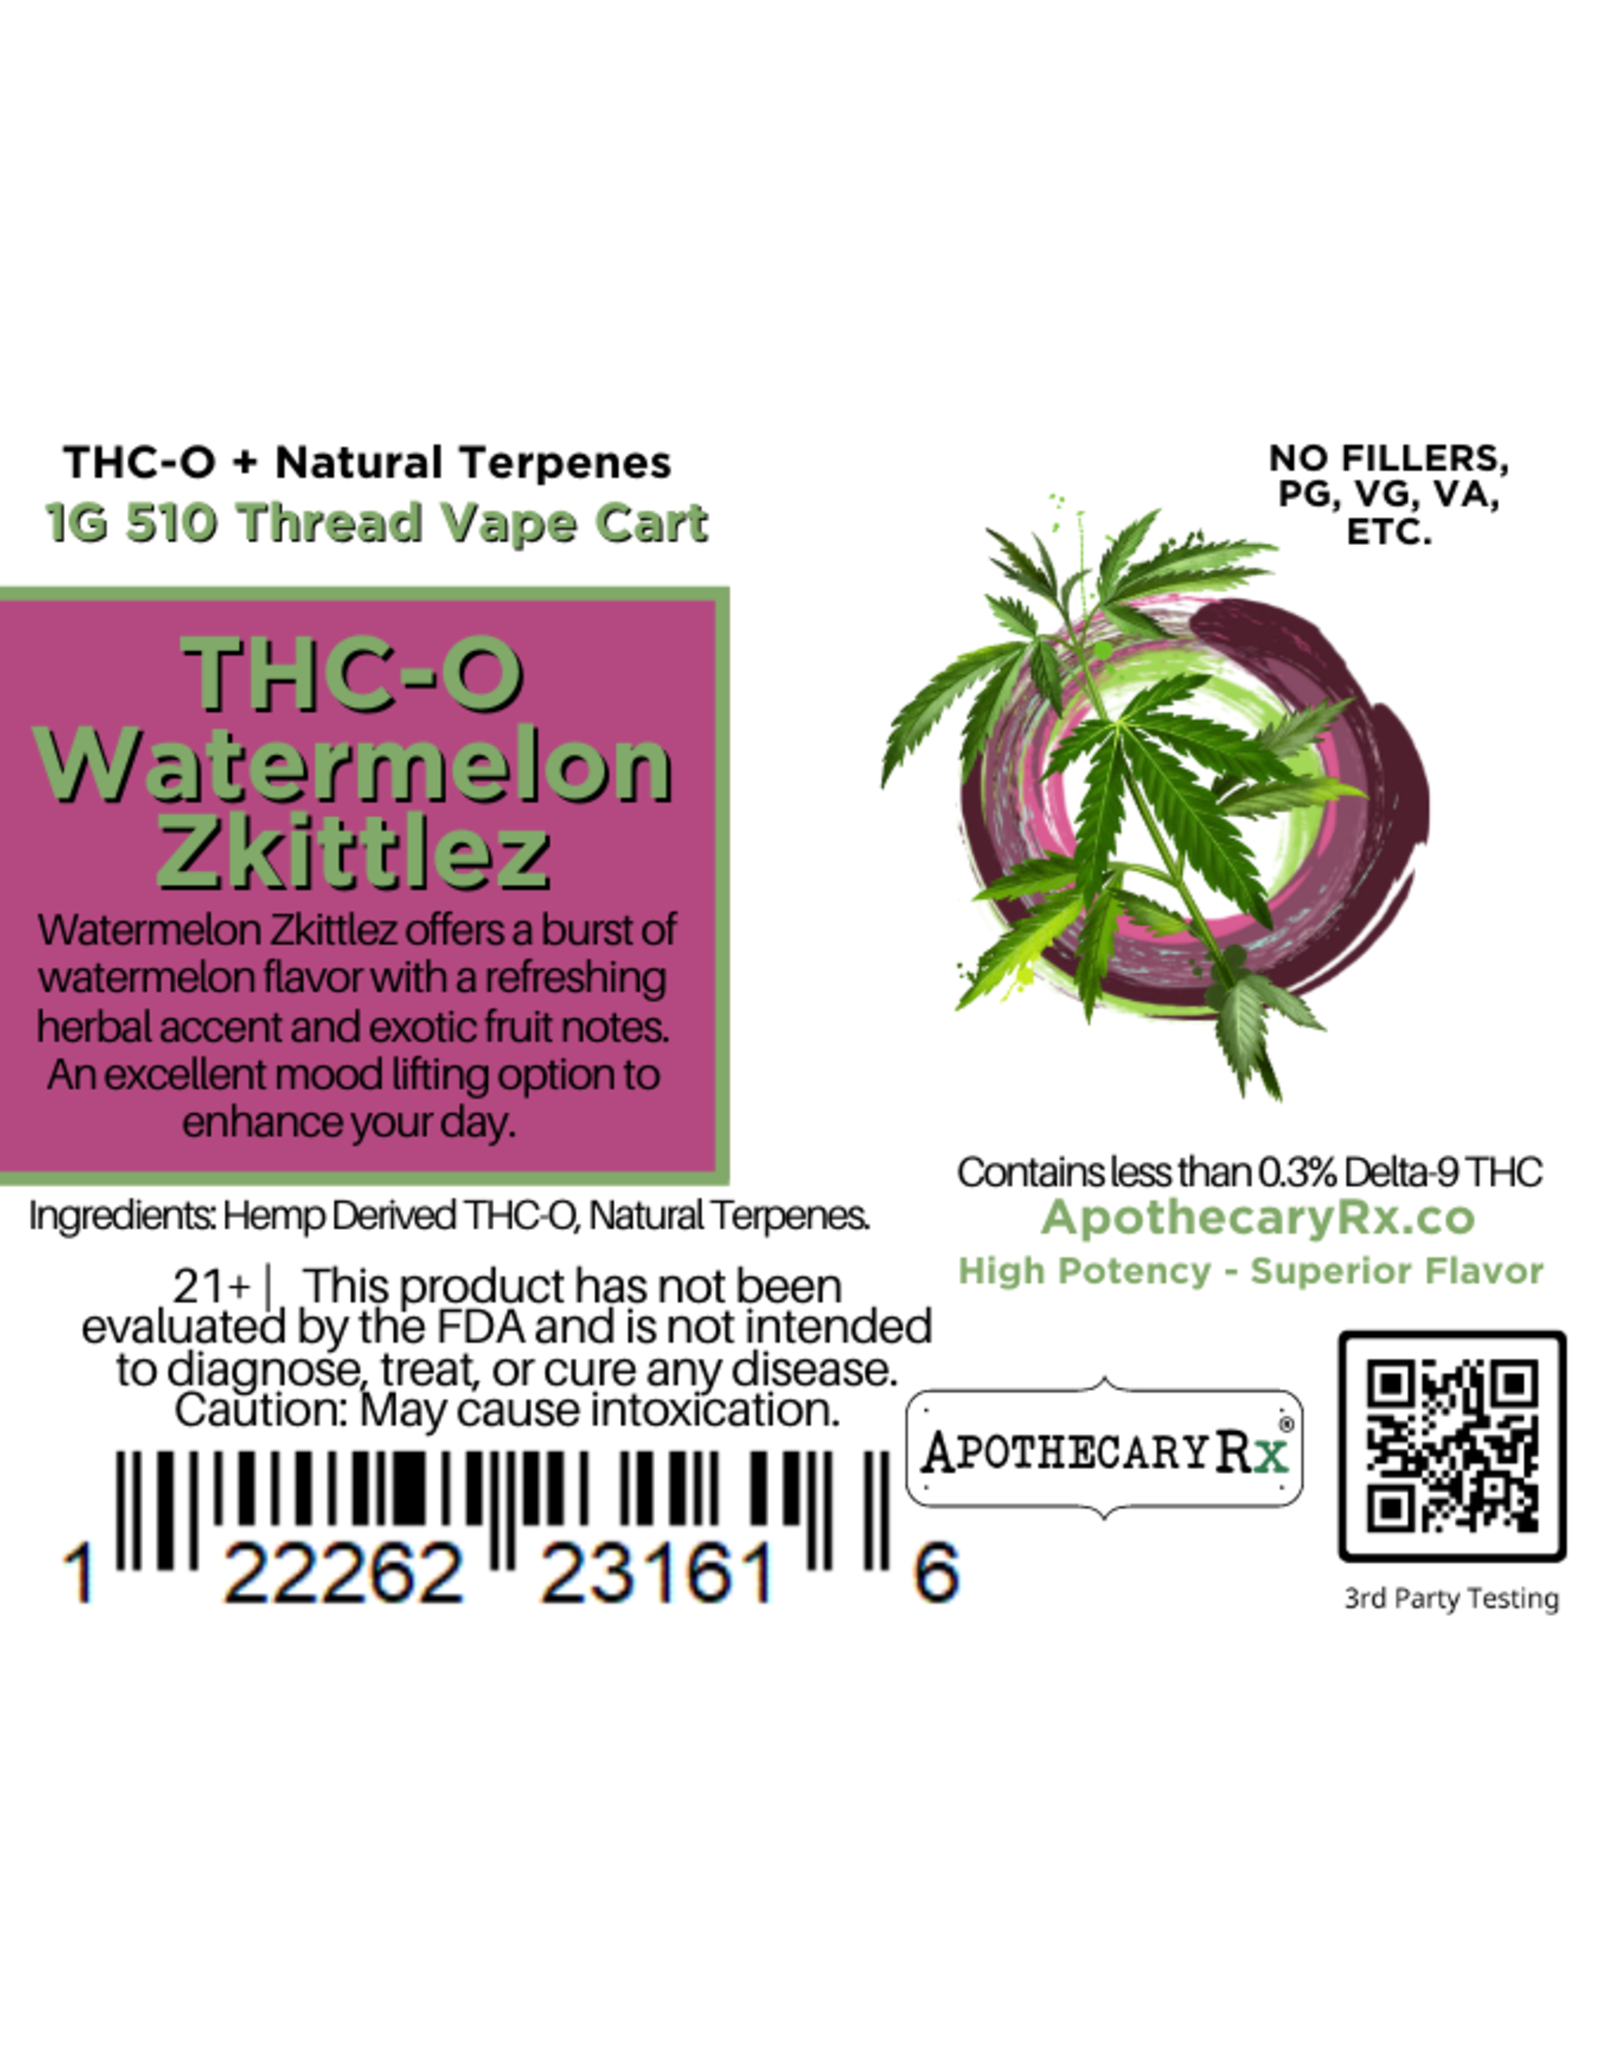 Apothecary Rx Apothecary Rx THCO Watermelon Zkittles Cartridge 1gr